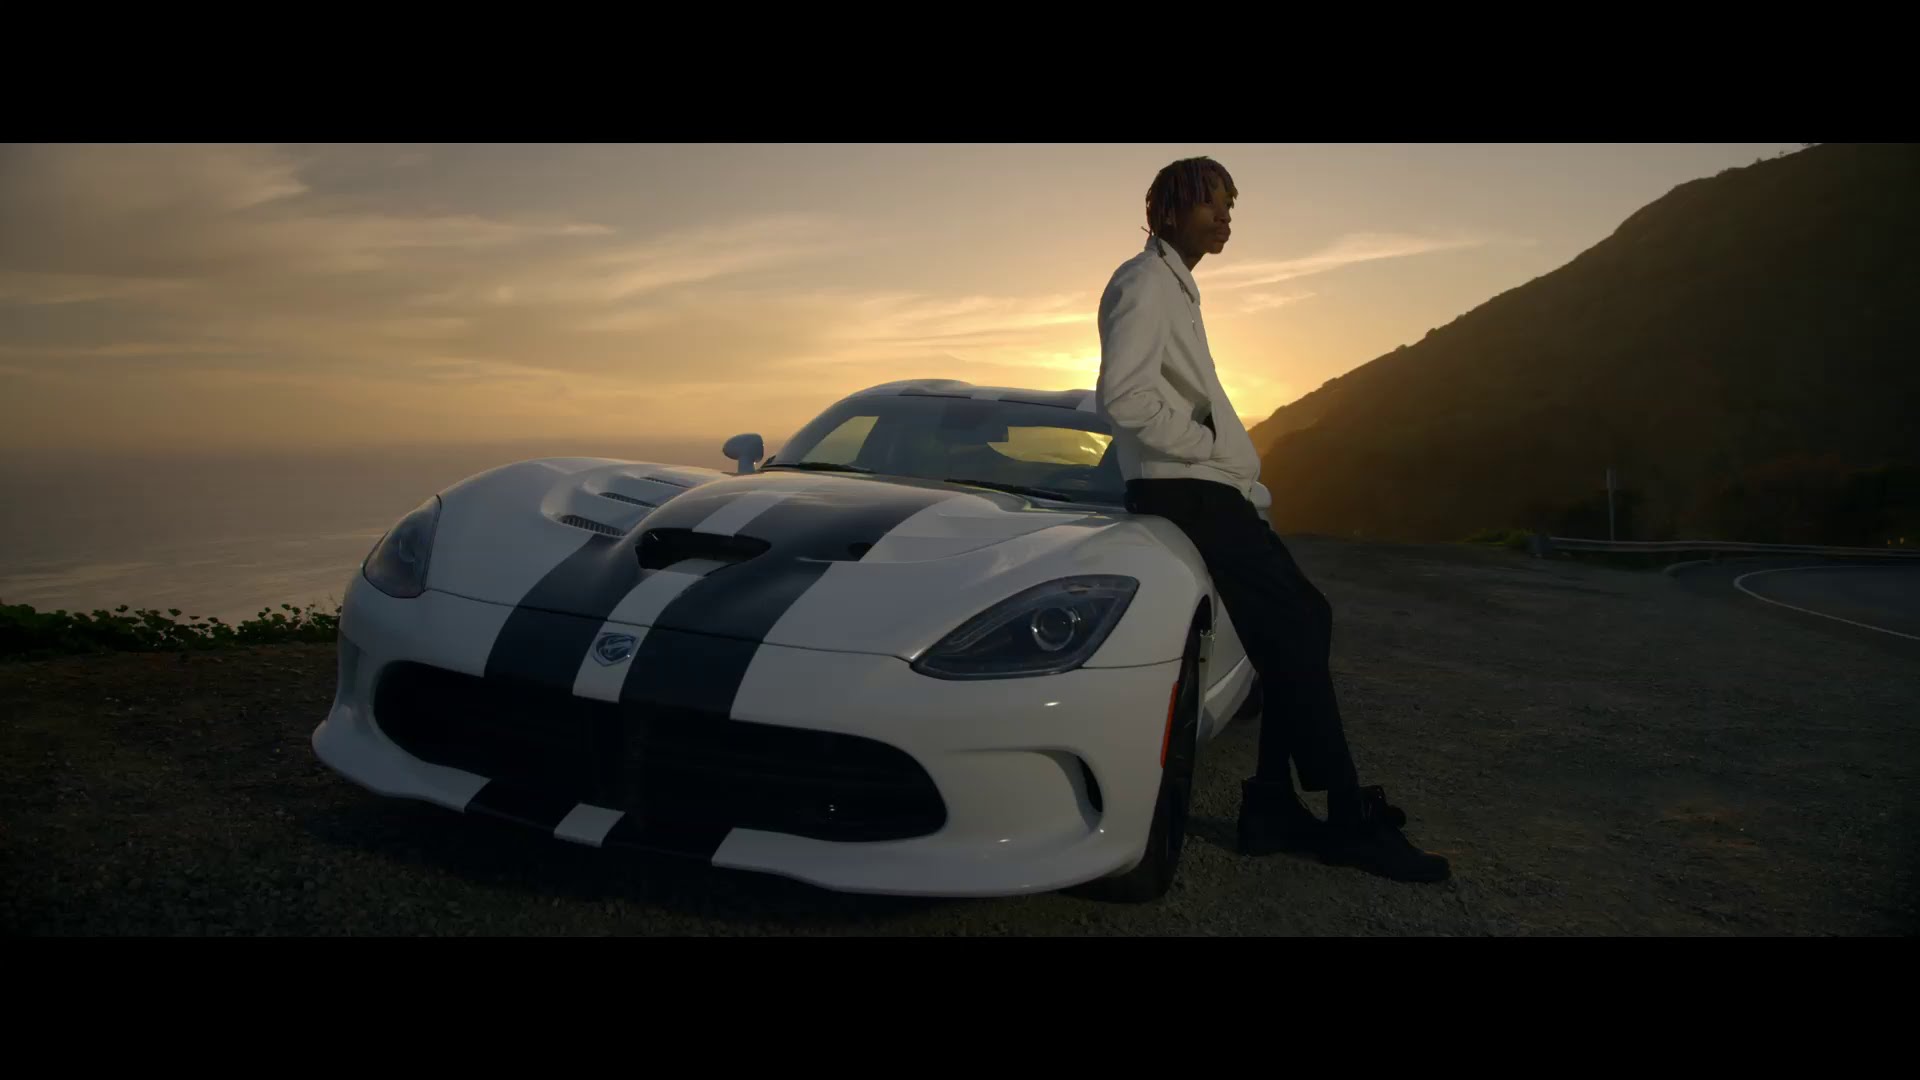 Wiz Khalifa’s ’See You Again’ topples ’Gangnam Style’ as most viewed YouTube video of all time